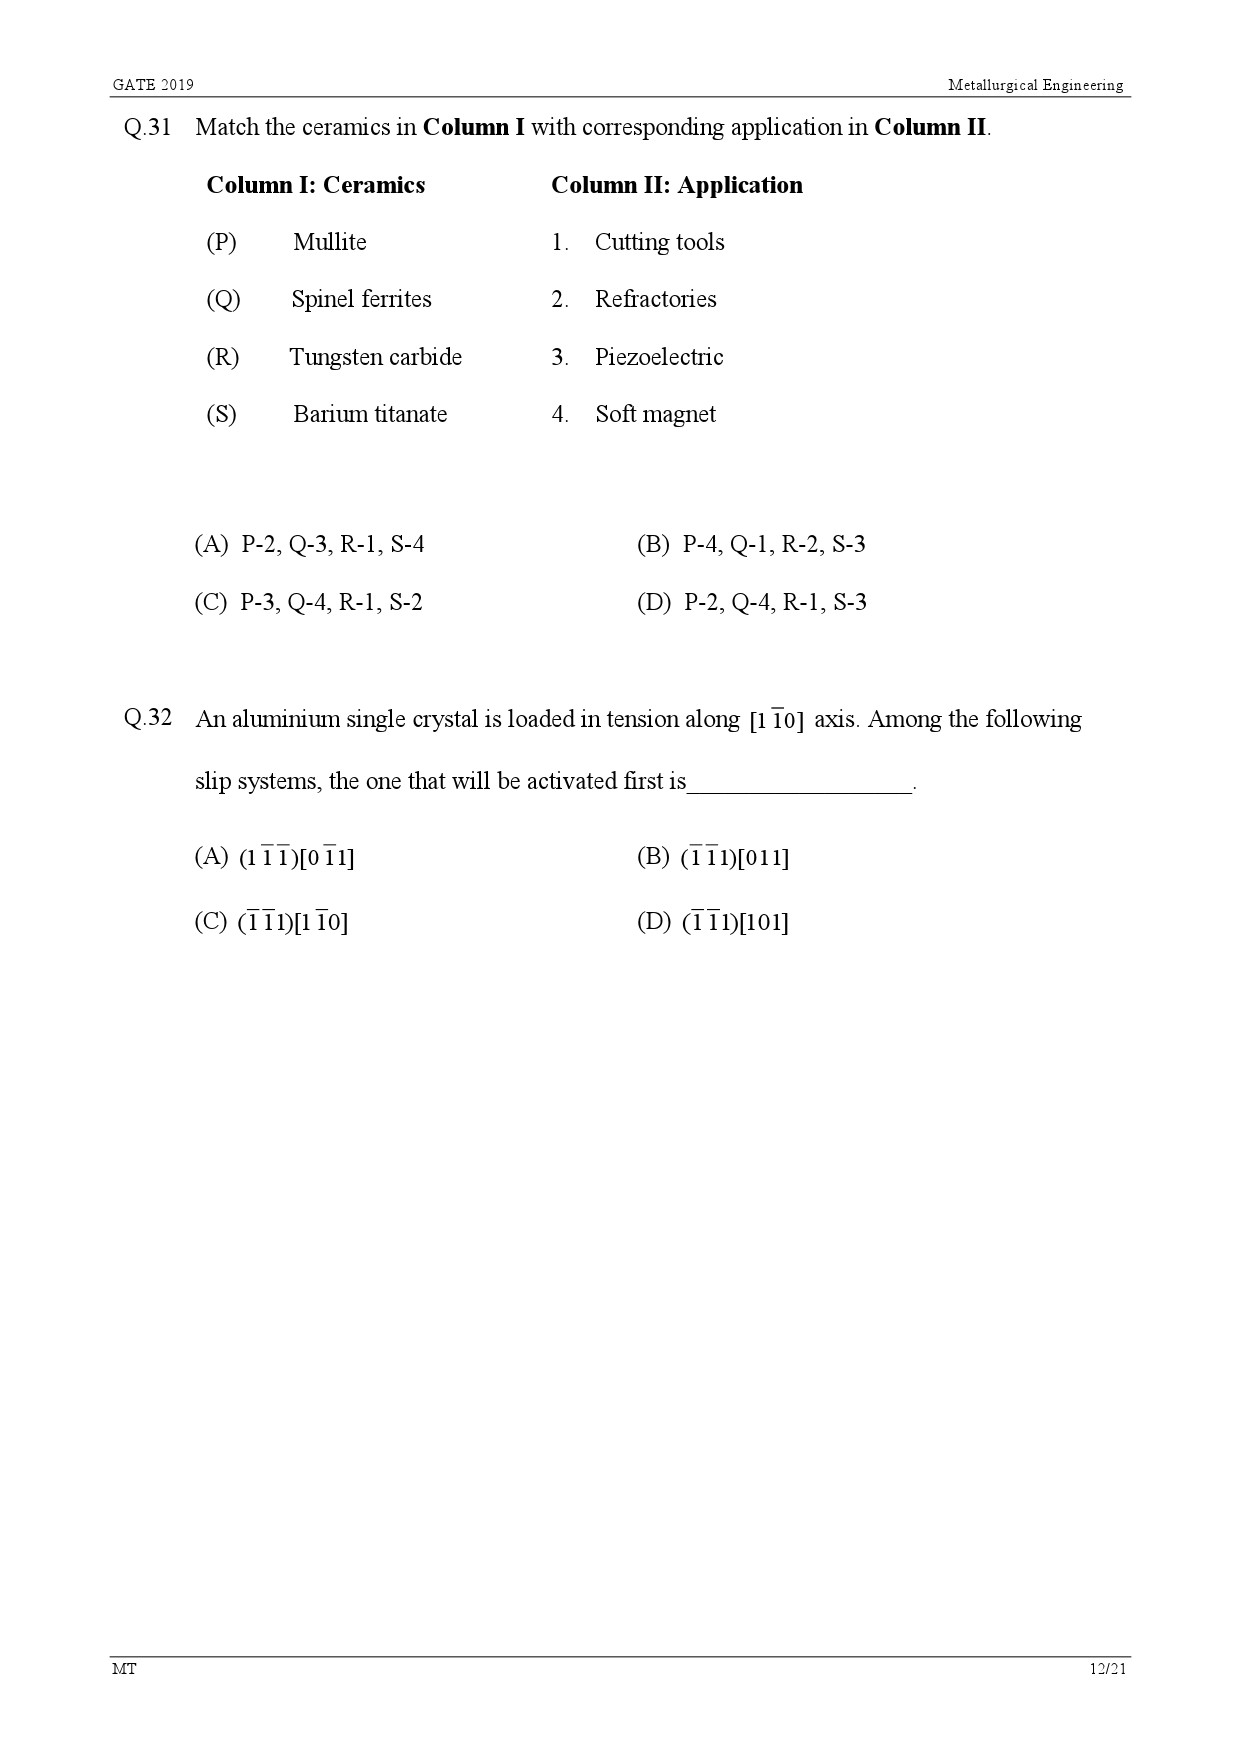 GATE Exam Question Paper 2019 Metallurgical Engineering 15